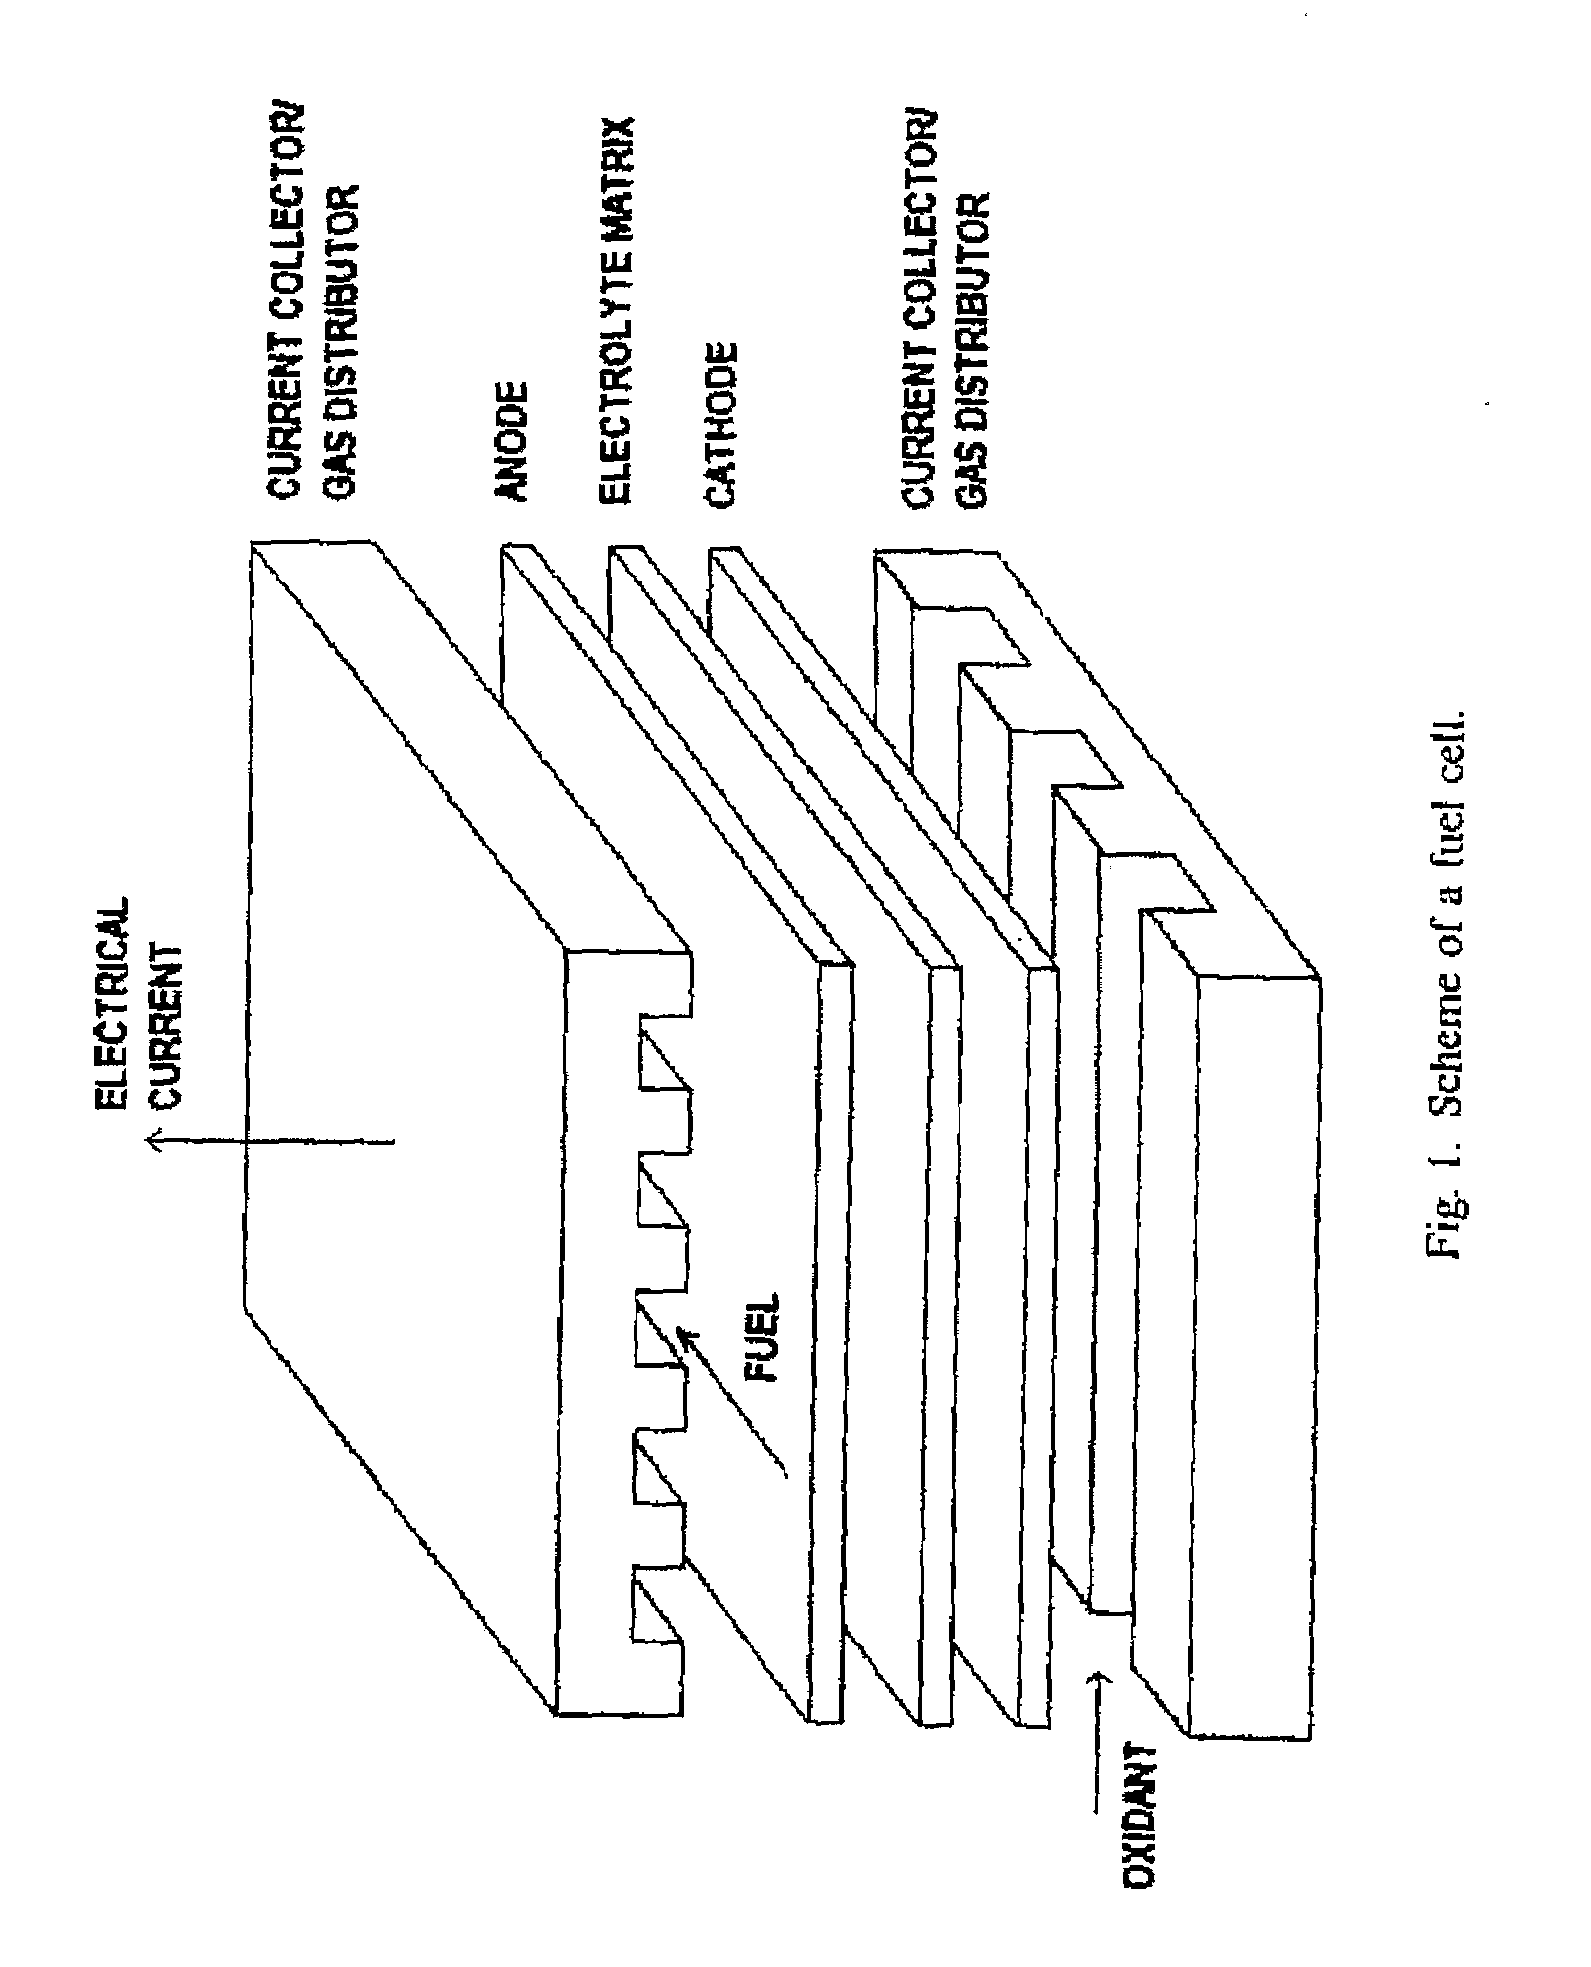 Method and System of Operating Molten Carbonate Fuel Cells